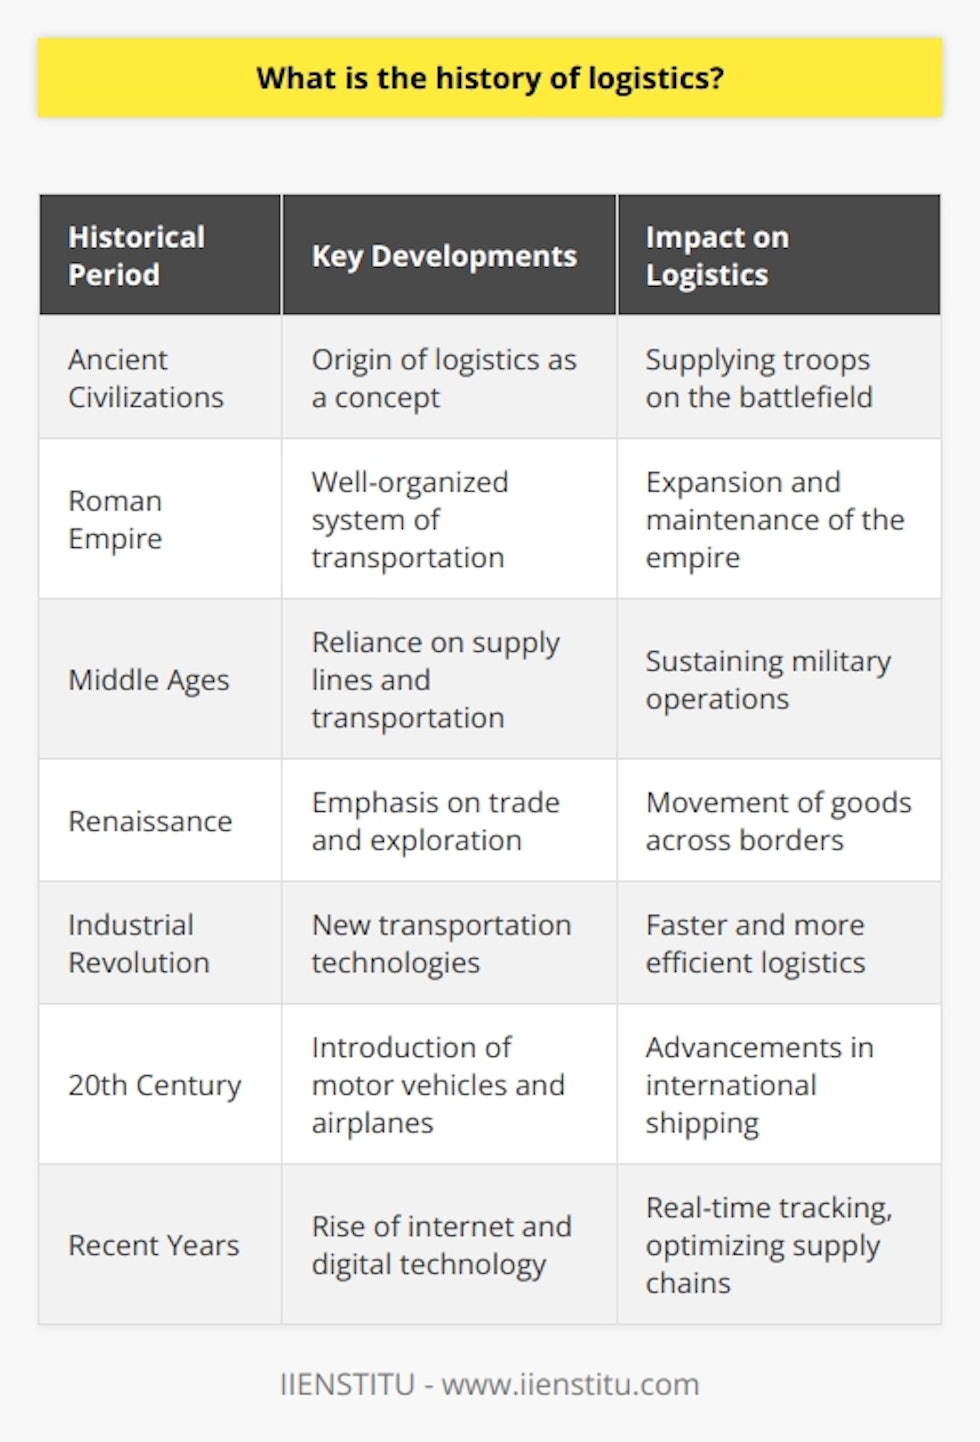 The history of logistics can be traced back to ancient civilizations where it played a crucial role in military campaigns. The term logistics itself originated from the Greek word logistikē, meaning calculating. In ancient times, logistics was primarily used to supply troops on the battlefield, ensuring that they received the necessary provisions and equipment.During the Roman Empire, logistics became even more significant as it was essential for the expansion and maintenance of their vast empire. The Romans utilized a well-organized system for transporting goods and supplies to their armies and distant provinces. They constructed an extensive network of roads, bridges, and ports and introduced the concept of depots and warehouses to store and distribute resources efficiently.In the Middle Ages, logistics continued to be crucial for sustaining military operations. Armies relied on supply lines and transportation to receive reinforcements, weapons, and food during long sieges or campaigns. The advent of trade and exploration during the Renaissance period further emphasized the need for efficient logistics to move goods and materials across borders and continents.The Industrial Revolution, which began in the late 18th century, revolutionized logistics. New technologies such as steam engines and railroads allowed for faster and more efficient transportation of goods over long distances. The development of canals, such as the Erie Canal in the United States, facilitated the movement of goods between regions, boosting trade and economic growth.The 20th century witnessed significant advancements in logistics with the introduction of motor vehicles and airplanes. The invention of the shipping container by Malcolm McLean in the 1950s revolutionized the international shipping industry, simplifying the handling and transportation of goods across different modes of transport.In recent years, the rise of the internet and digital technology has transformed the logistics industry yet again. Companies can now track shipments and items in real-time, optimizing supply chain operations and improving customer service. The advent of e-commerce has further fueled the need for efficient logistics solutions to meet the growing demands of online shopping.In conclusion, the history of logistics spans thousands of years, evolving along with the development of civilizations, trade, and technology. From its roots in ancient military campaigns to the modern-day era of digital tracking and global supply chains, logistics has played a fundamental role in facilitating trade, transportation, and economic growth.